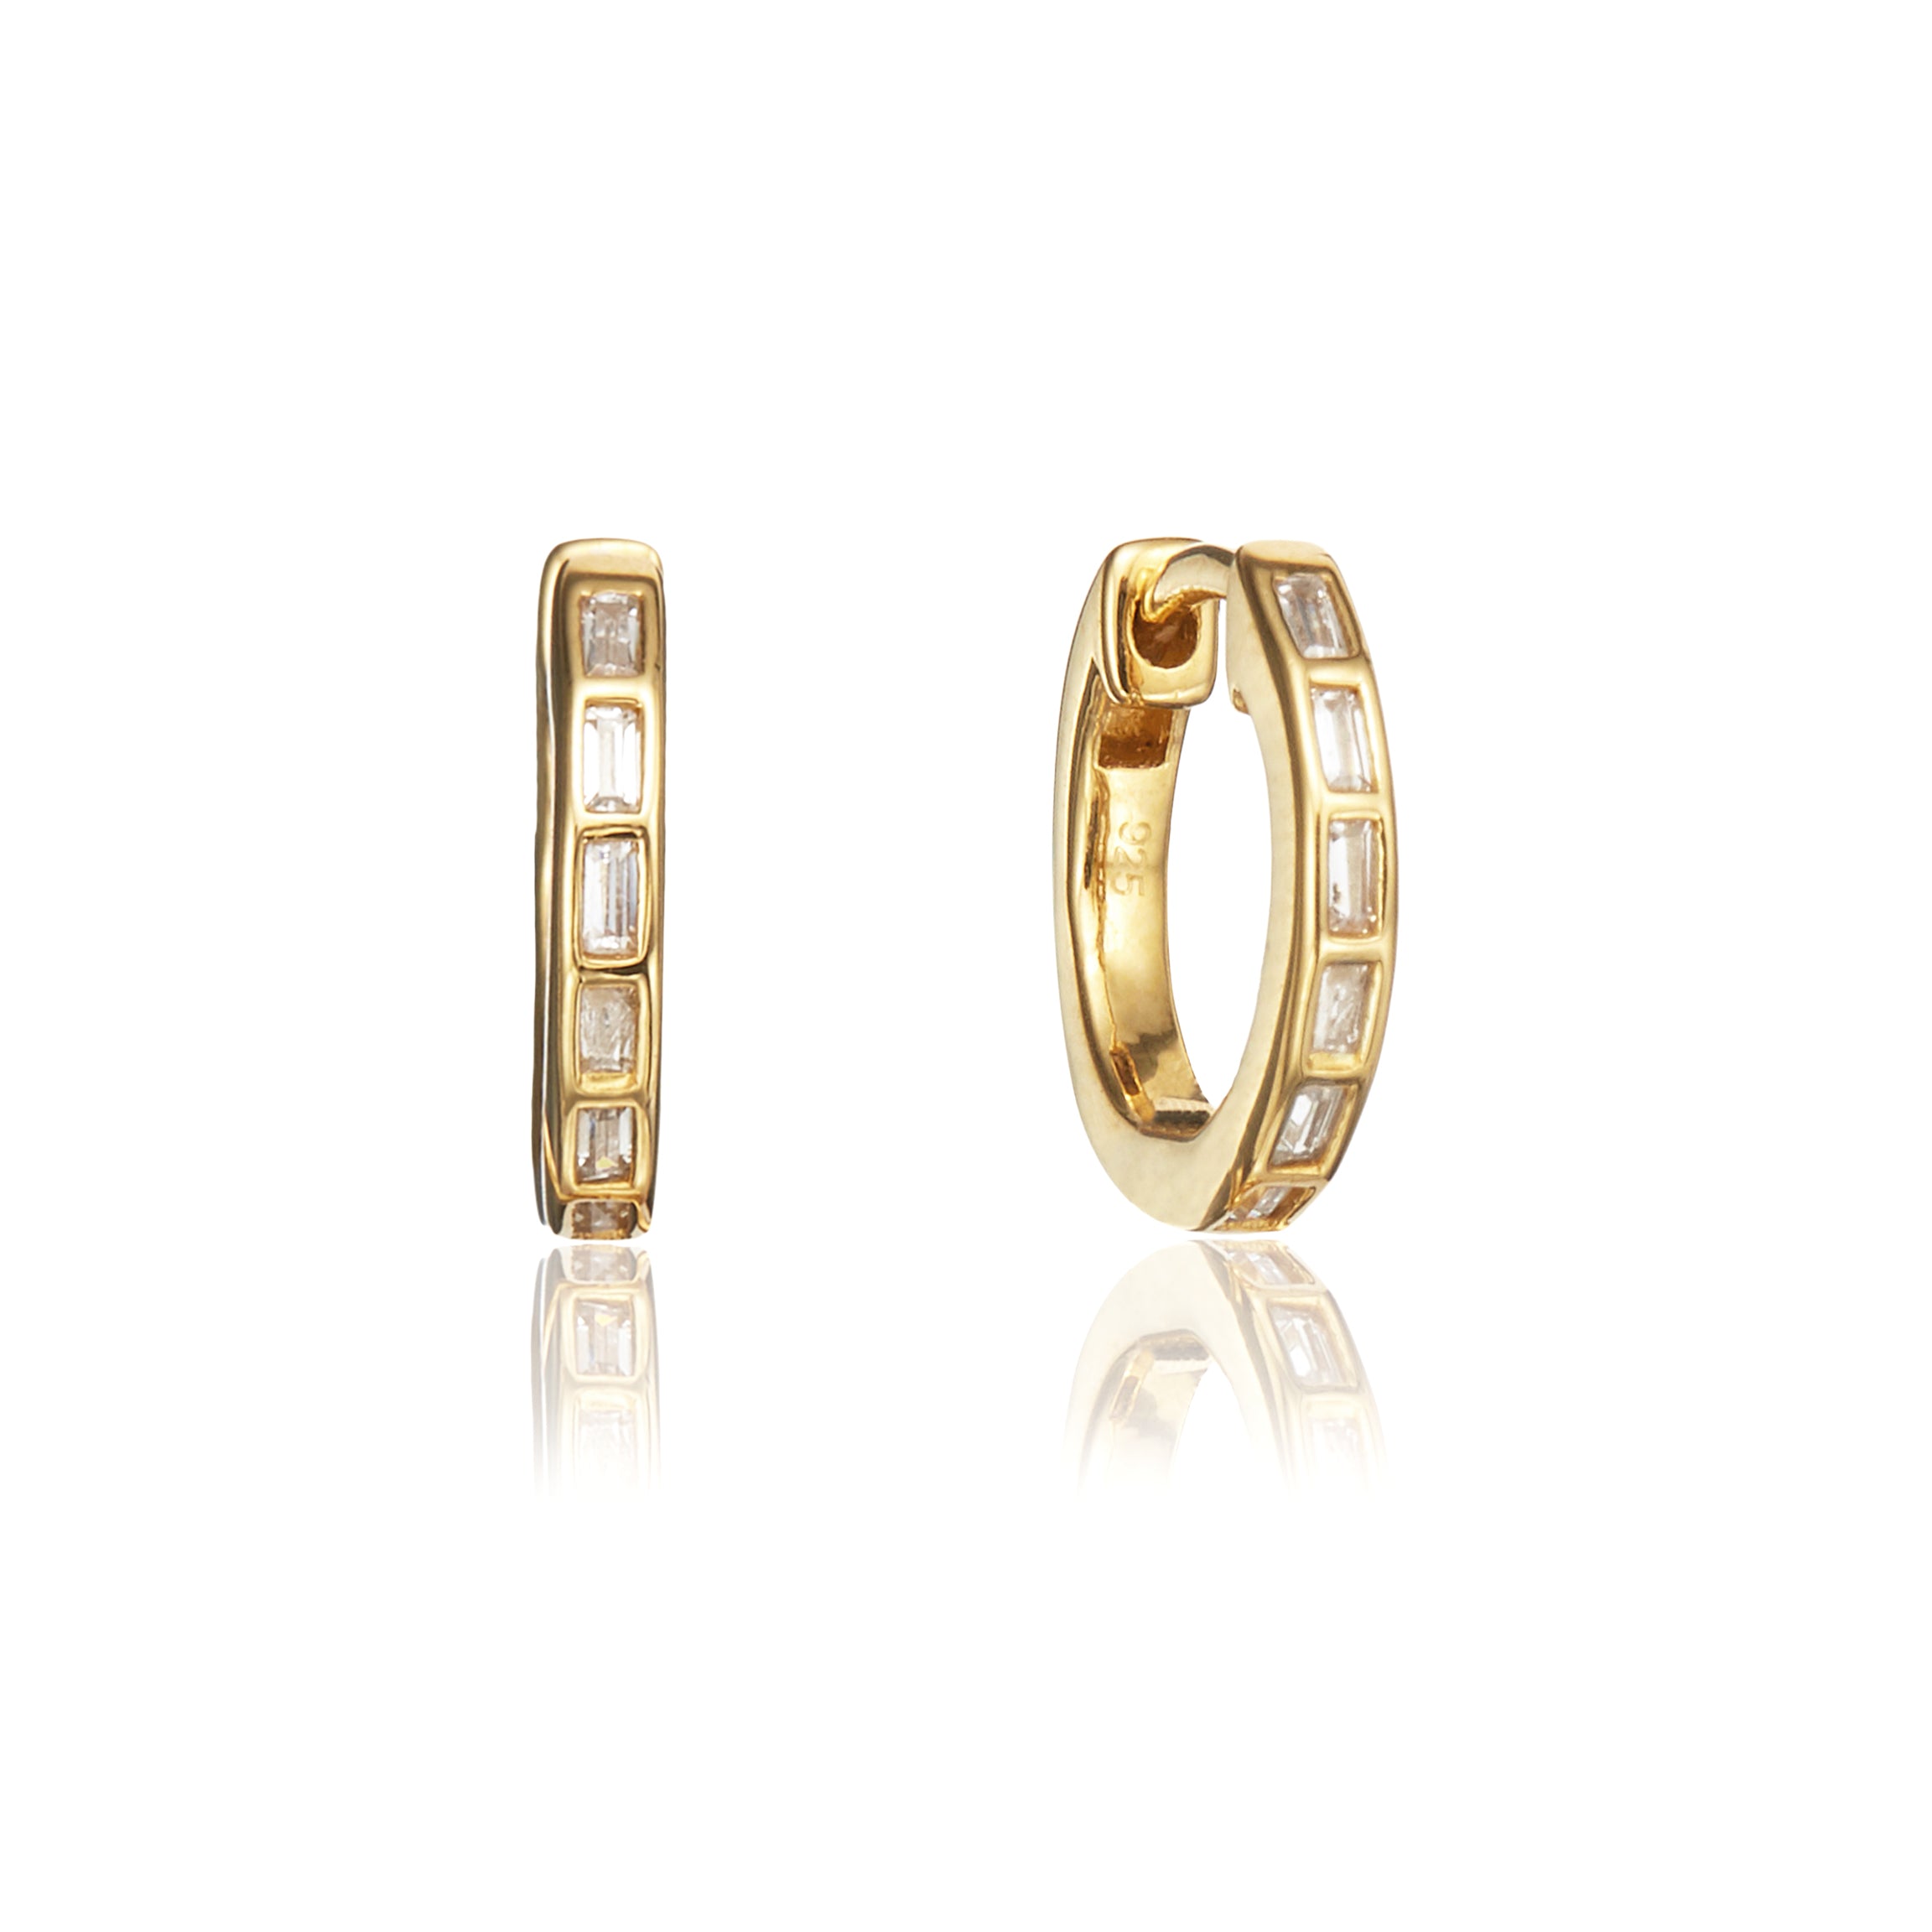 A pair of gold diamond style baguette pearl drop hoop earrings on a white background